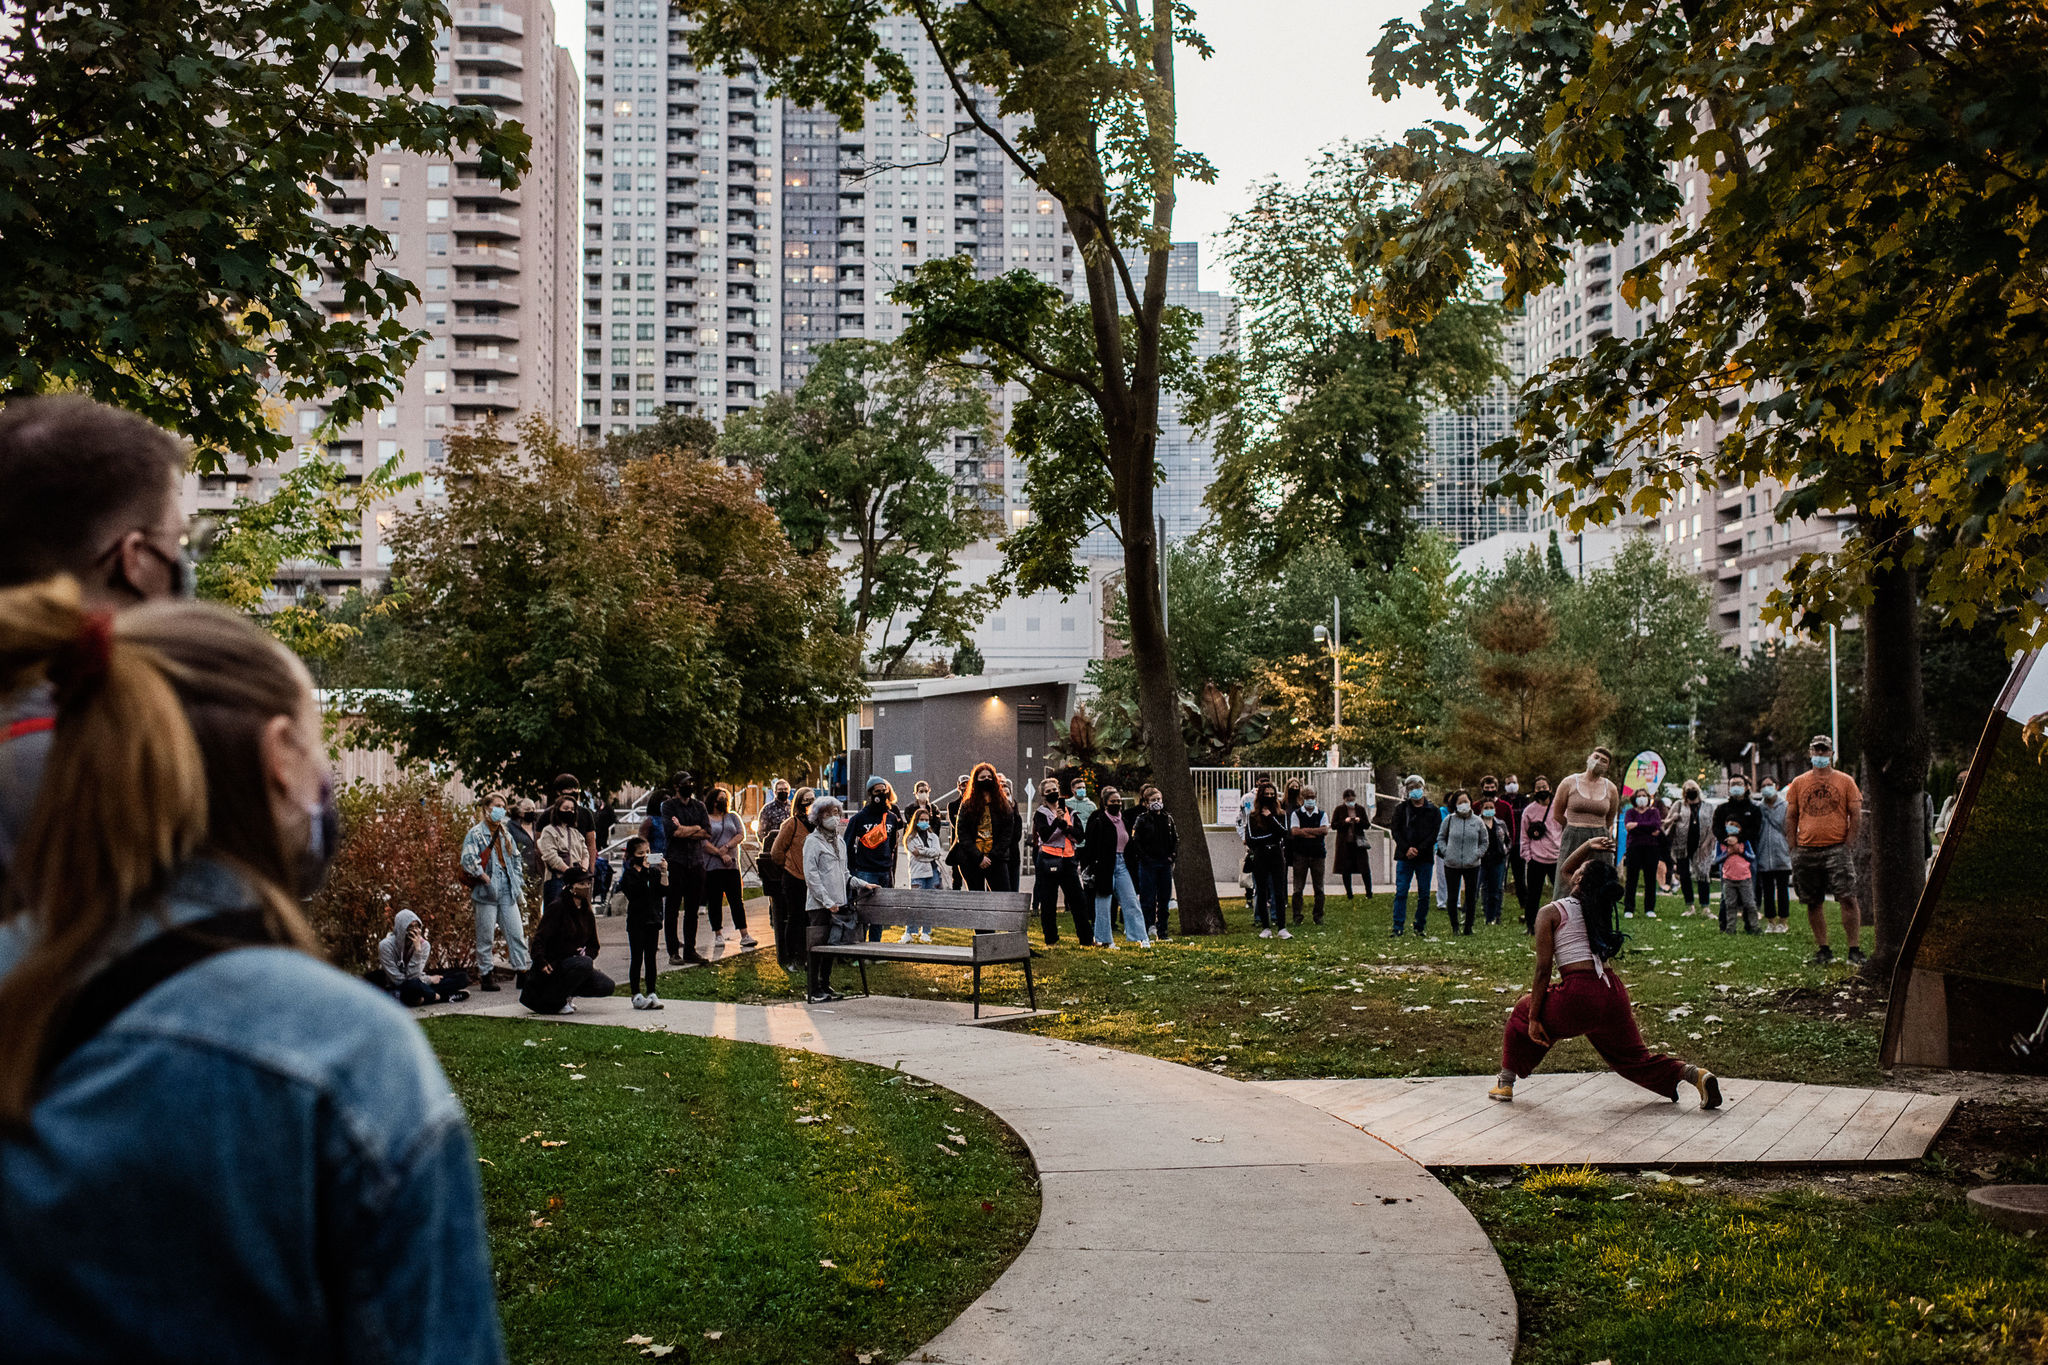 A woman dances on a sidewalk while audience members stand and form a circle around her.